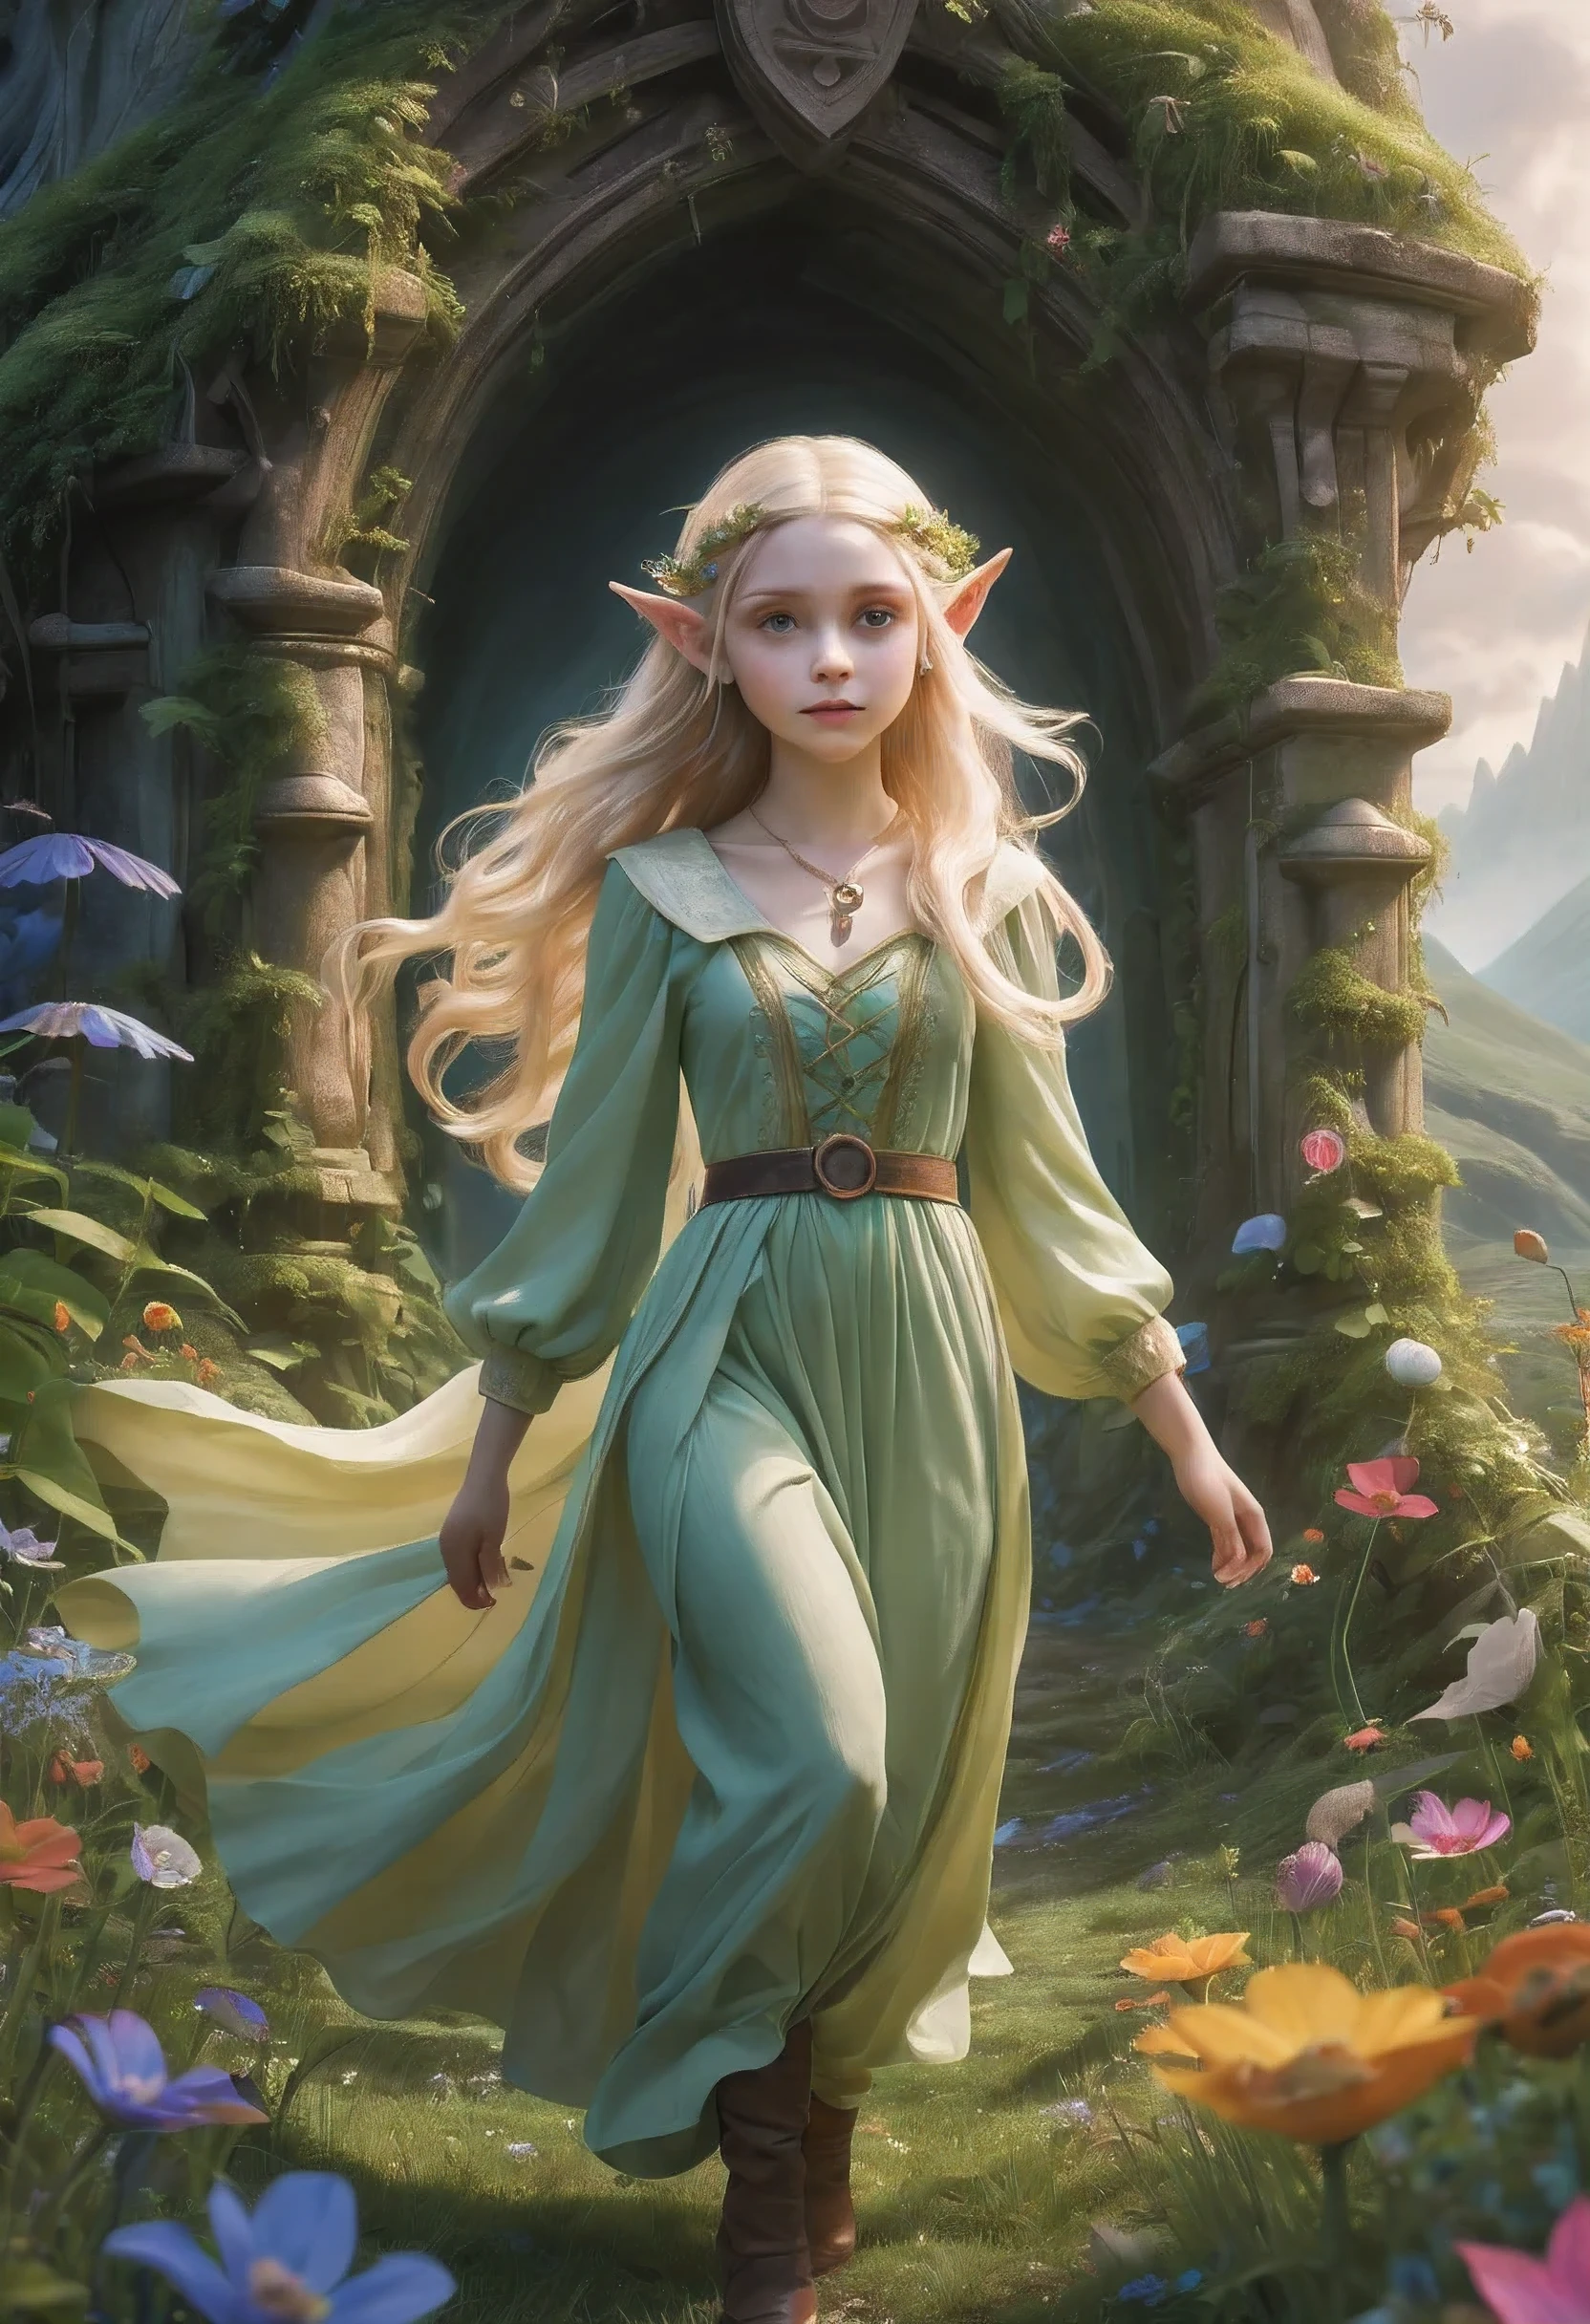 Create an enchanting and whimsical image of a eLEGANT elf girl with flowing blonde Hair, exploring the magical realm of Neverland. Picture her in a vibrant meadow surrounded by fantastical creatures, lost in this timeless and(( dreamlike world)). Capture the essence of innocence, fear, and the endless obstacles that unfold in the encasing landscapes of Neverland. | stunning detail, creative, cinematic, amazing composition, elegant, sad, fascinating, highly detailed, intricate, dynamic, beautiful, positive light, cute, engaging, new, enhanced,EpicLand,oil paint,6000, ruins,more detail XL,realistic